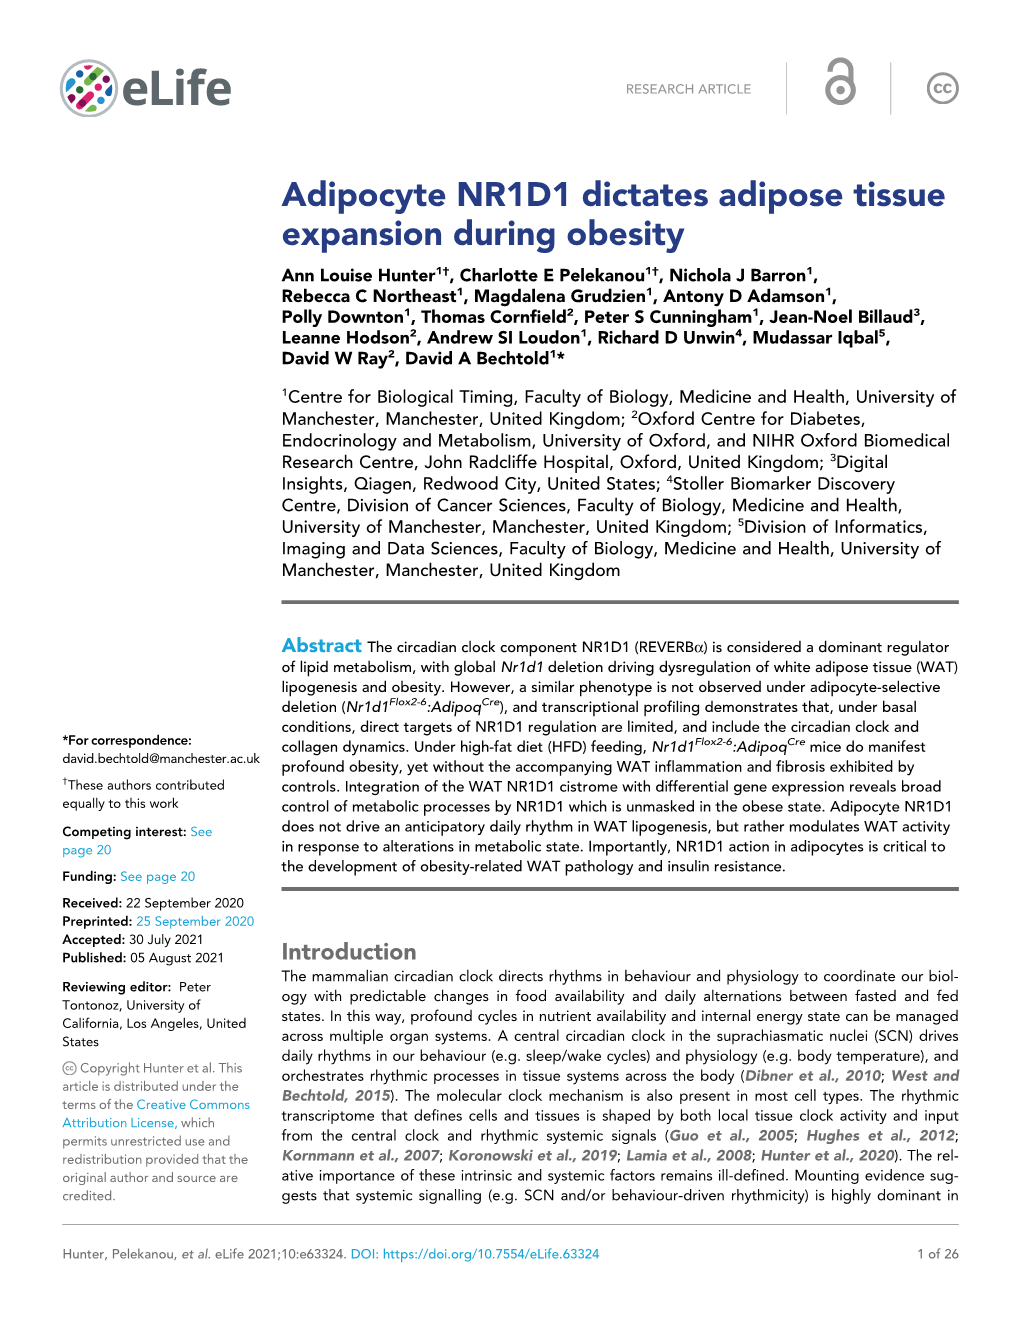 Adipocyte NR1D1 Dictates Adipose Tissue Expansion During Obesity